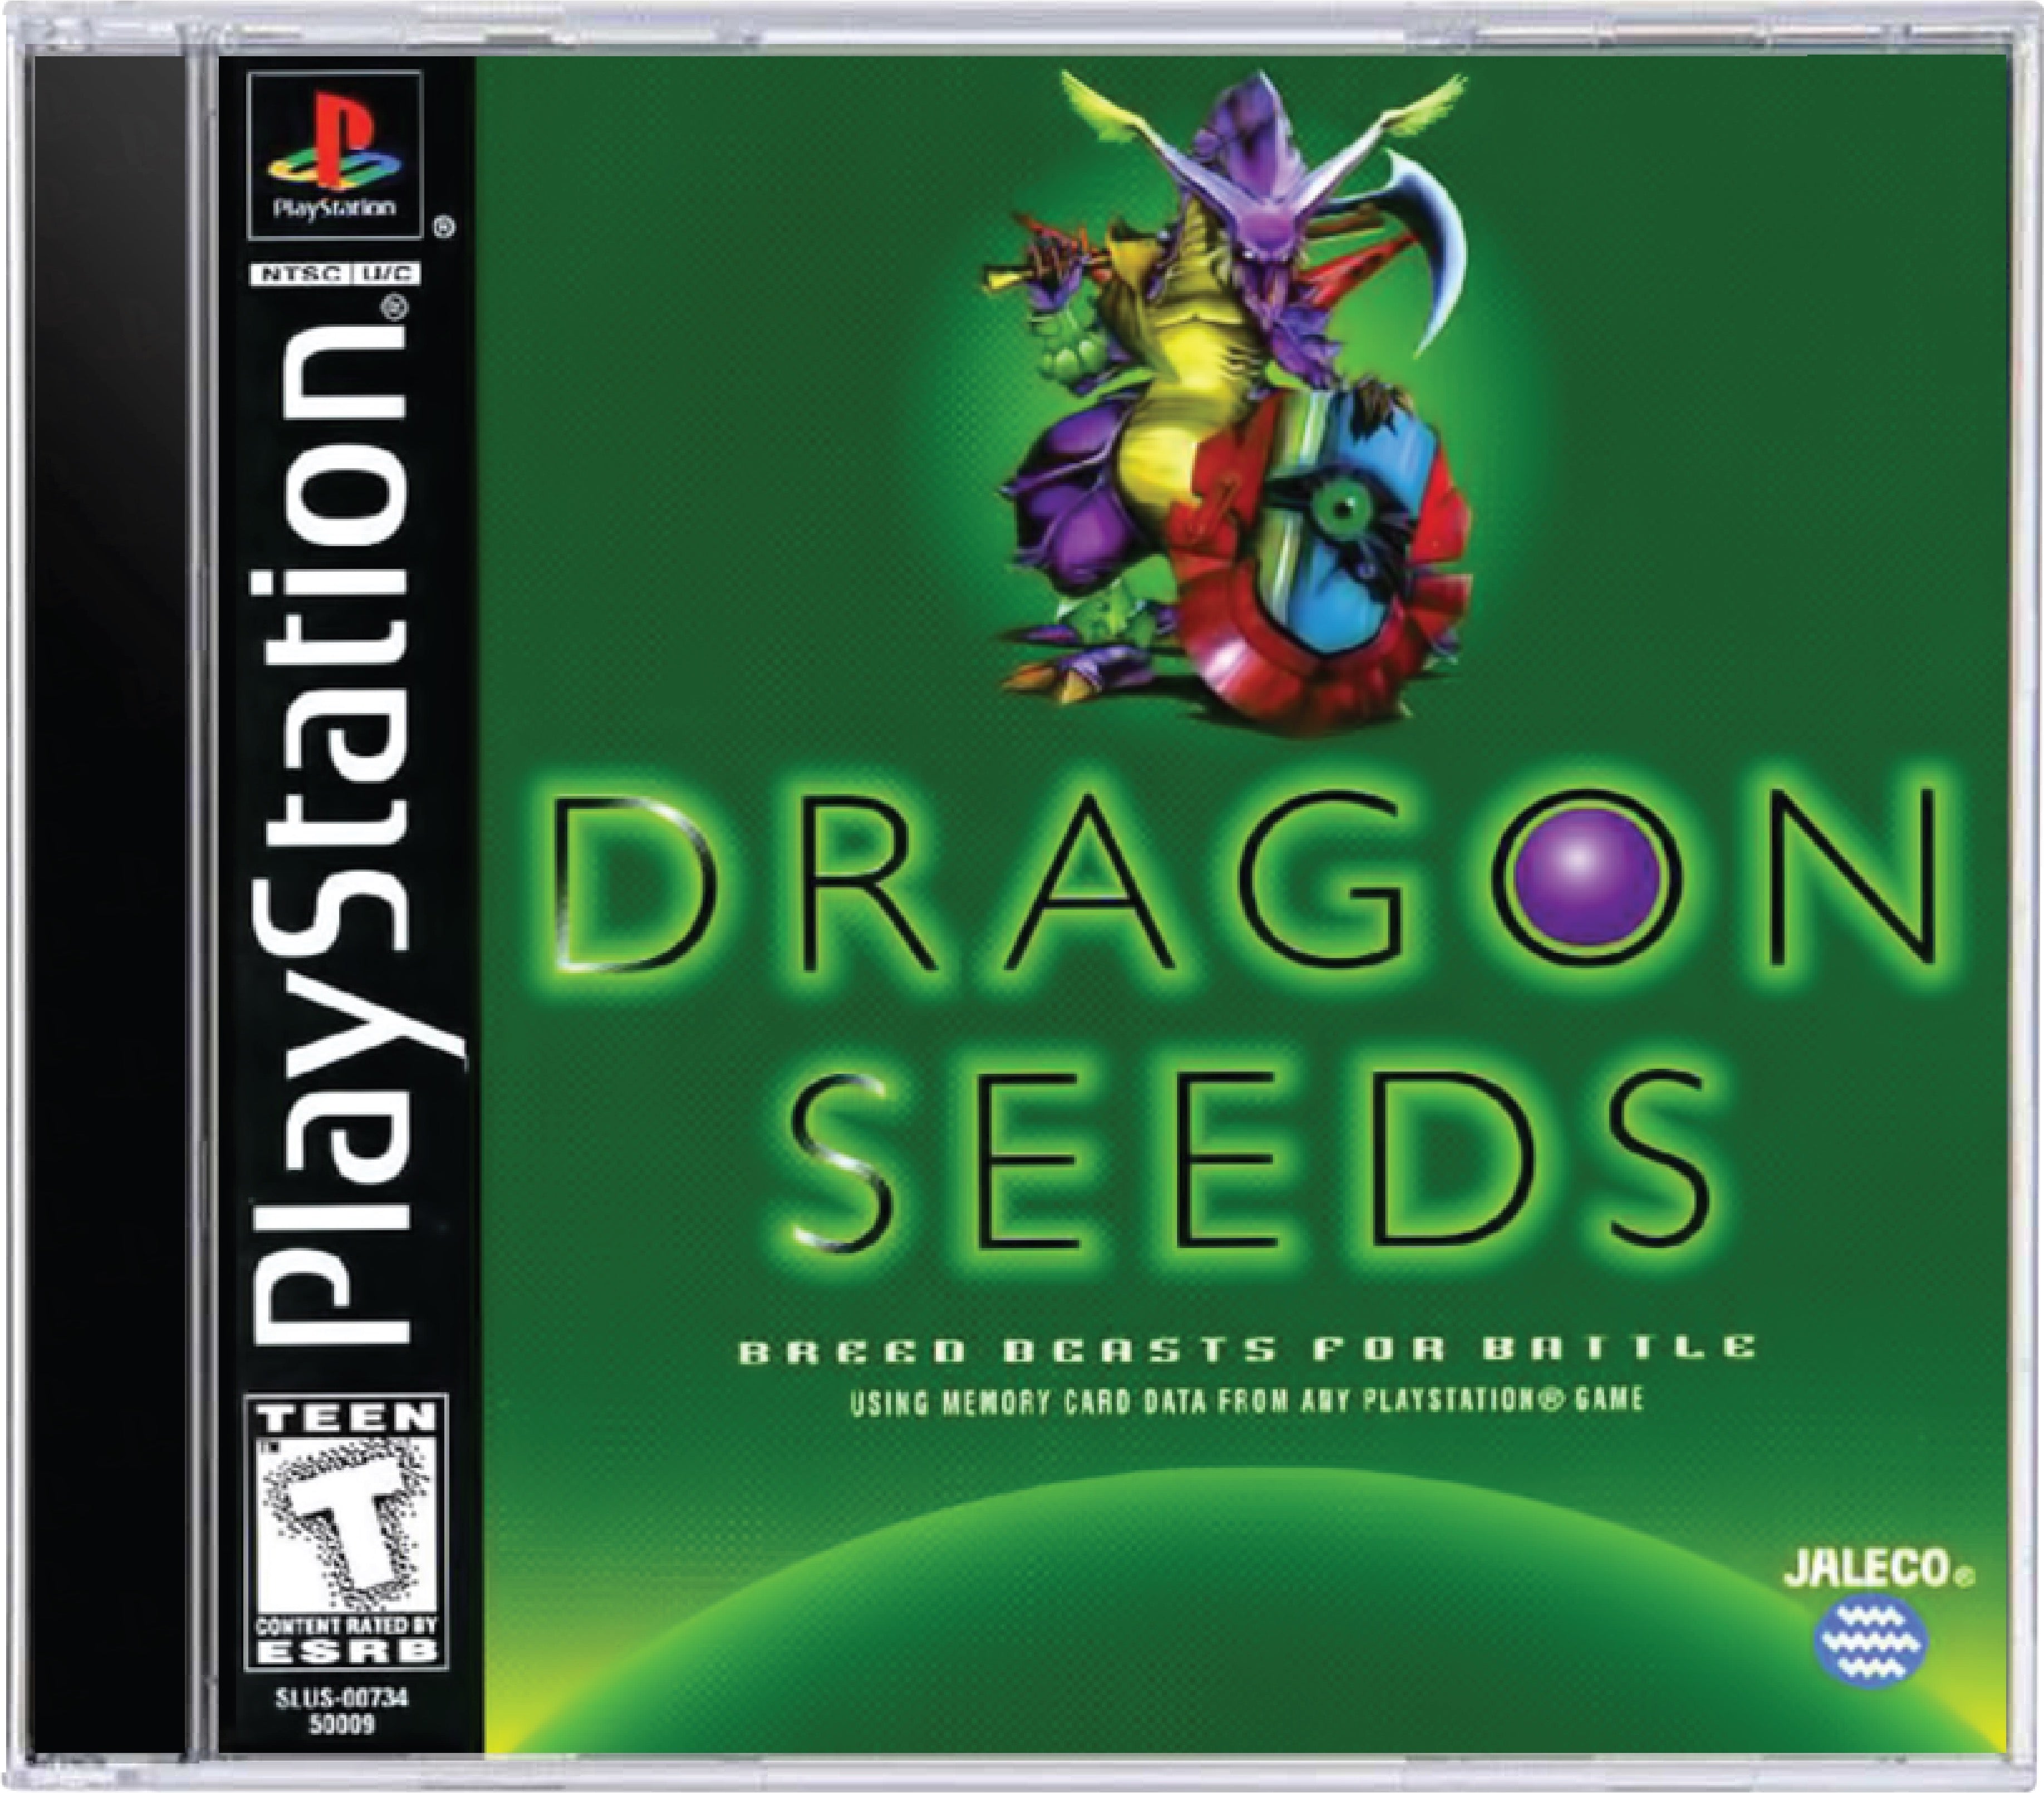 Dragon Seeds Cover Art and Product Photo